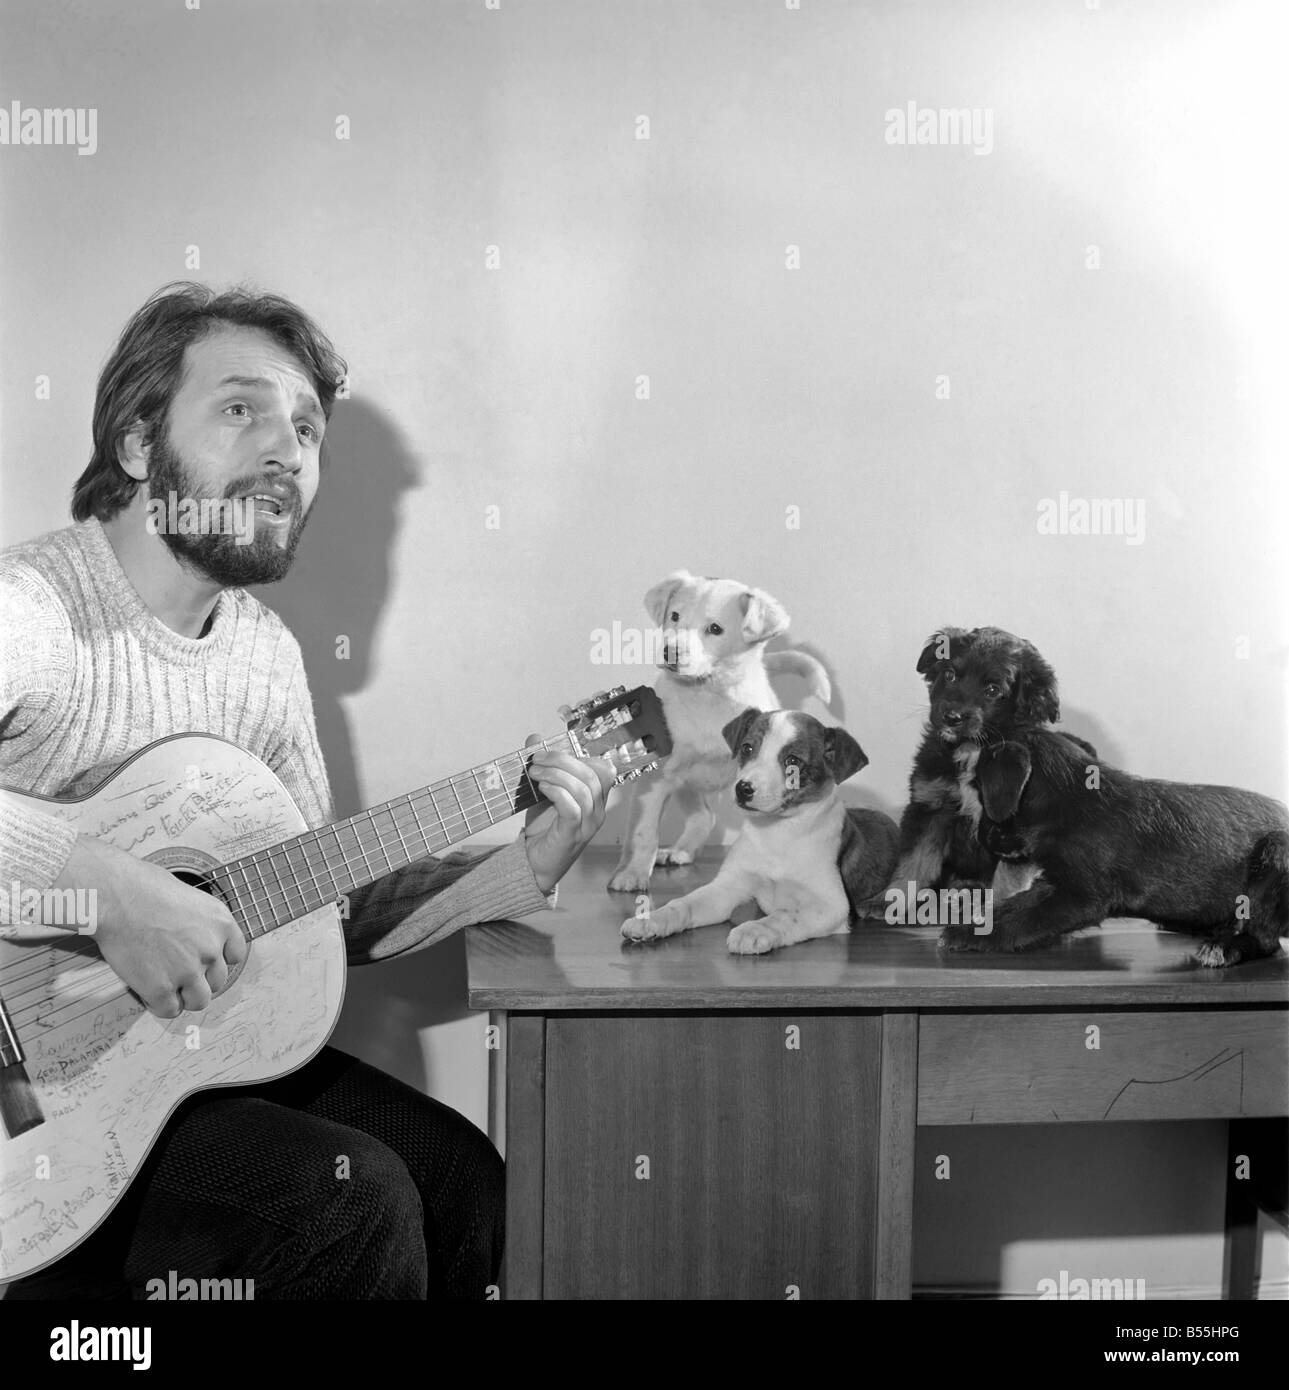 Salvatore Sangiorgi Italian singer and guitarist seen here at the RSPCA Home and Clinic Trenmare Gardens, London, singing to a pair of abandoned dogs December 1969 Z11924 Stock Photo